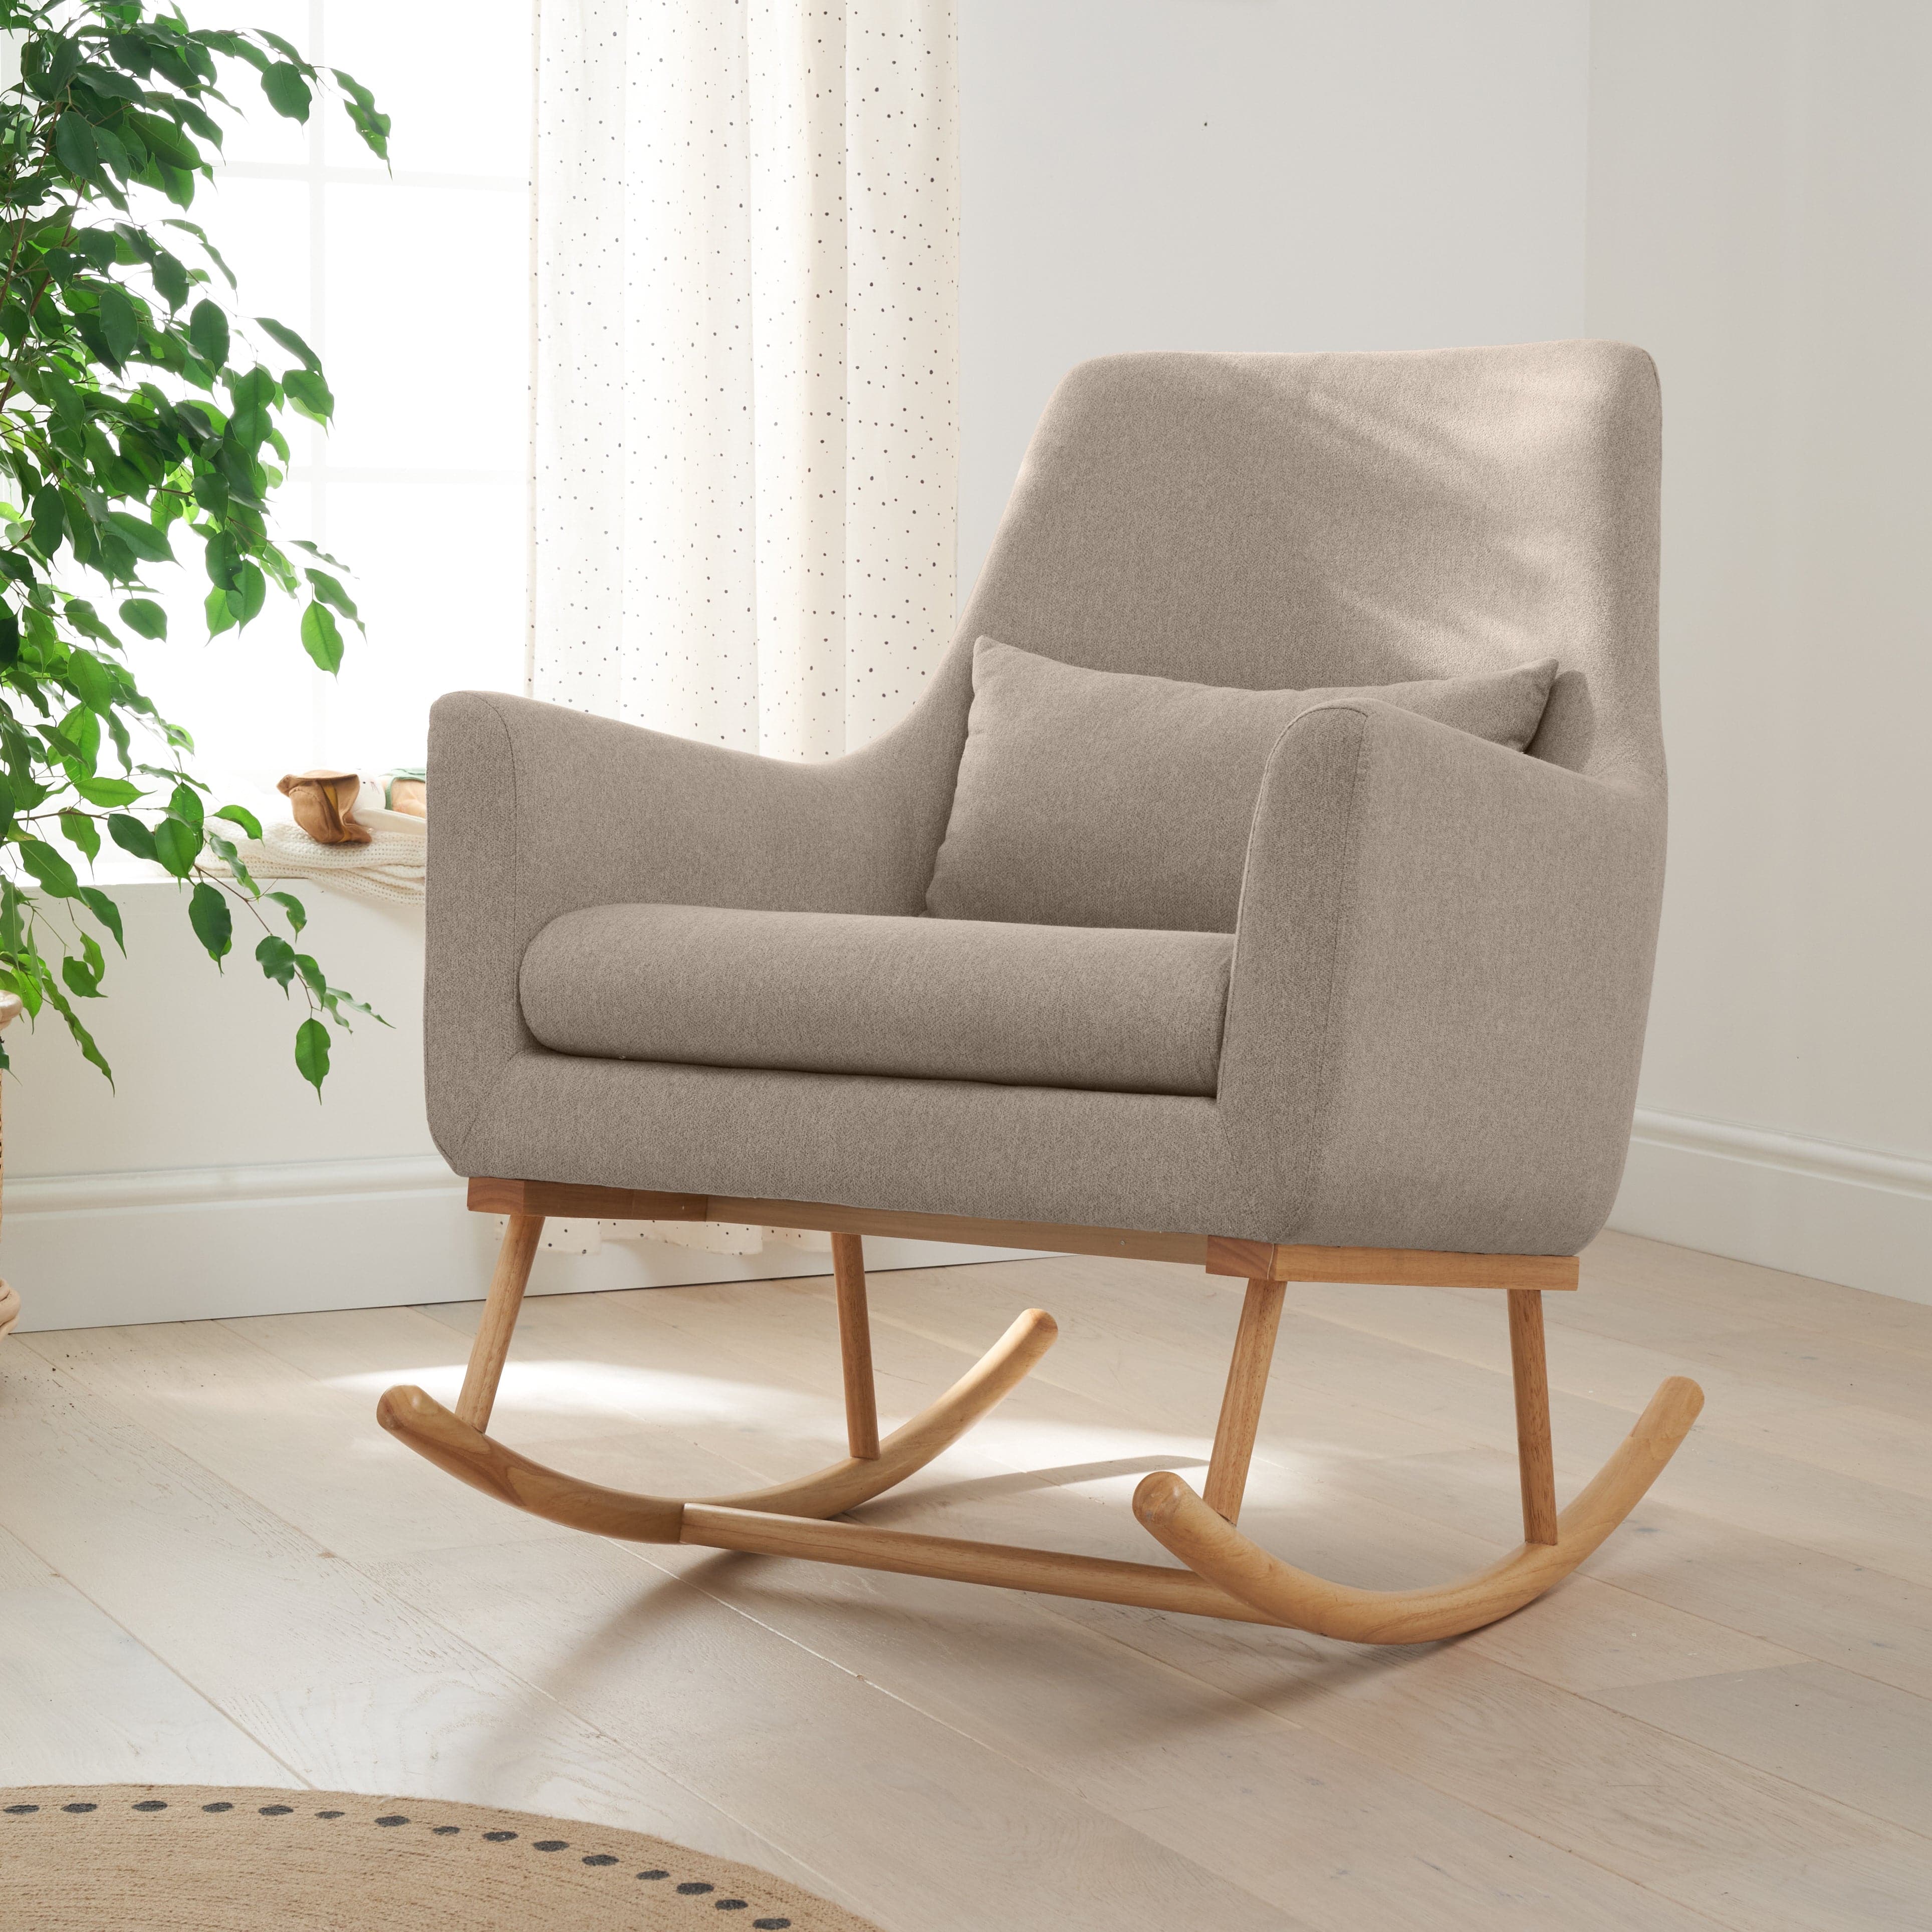 Tutti Bambini Oscar Rocking Chair - Stone/Natural -  | For Your Little One